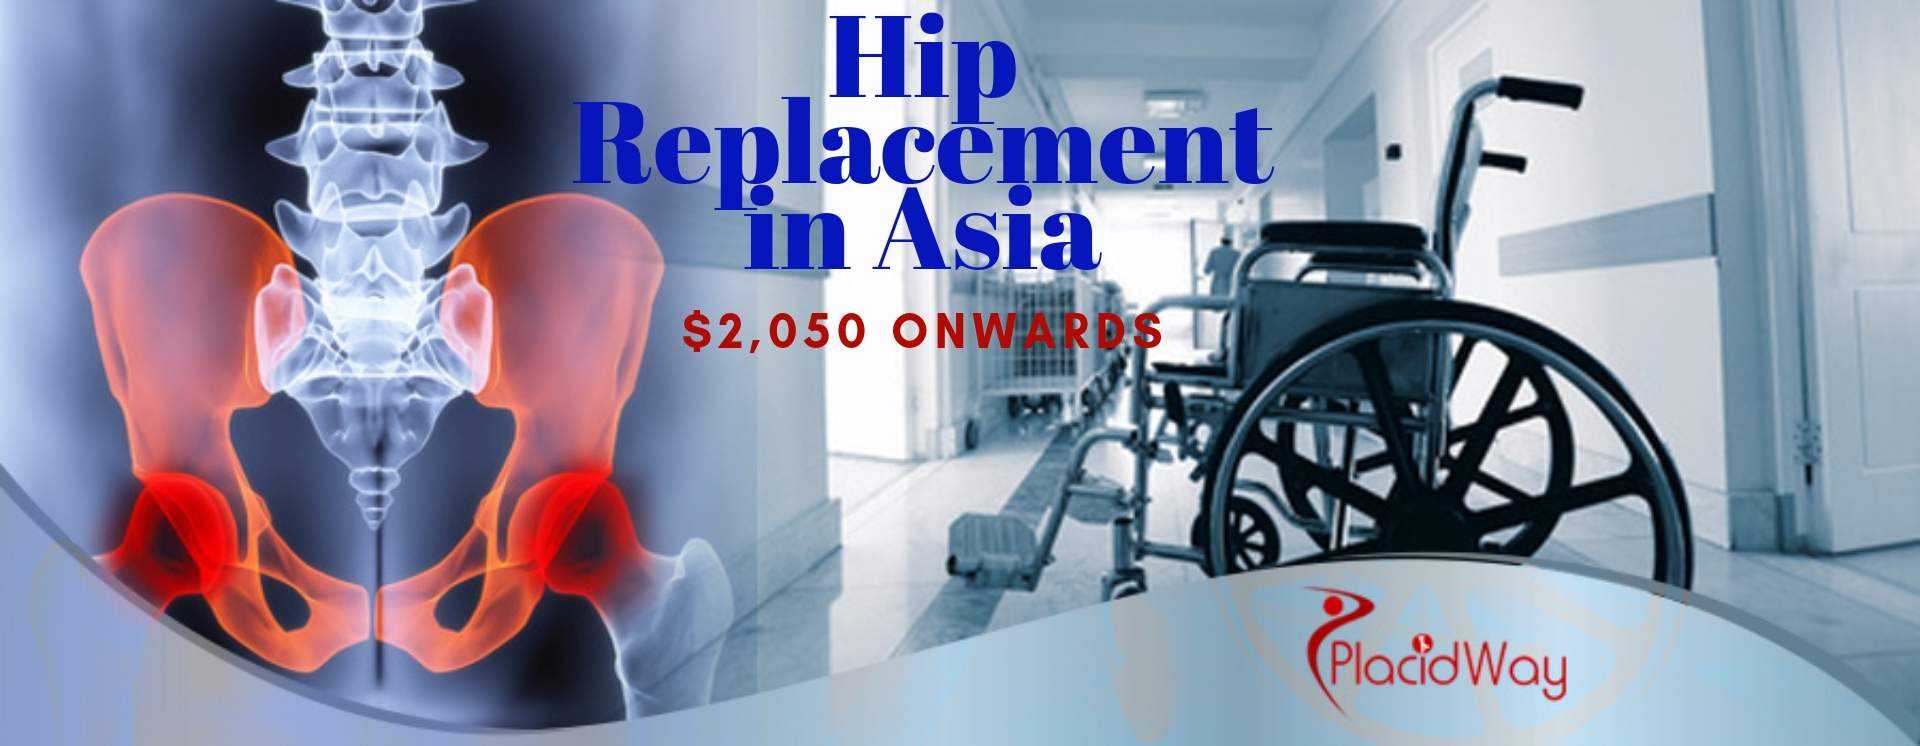 Cost Hip Replacement in Asia